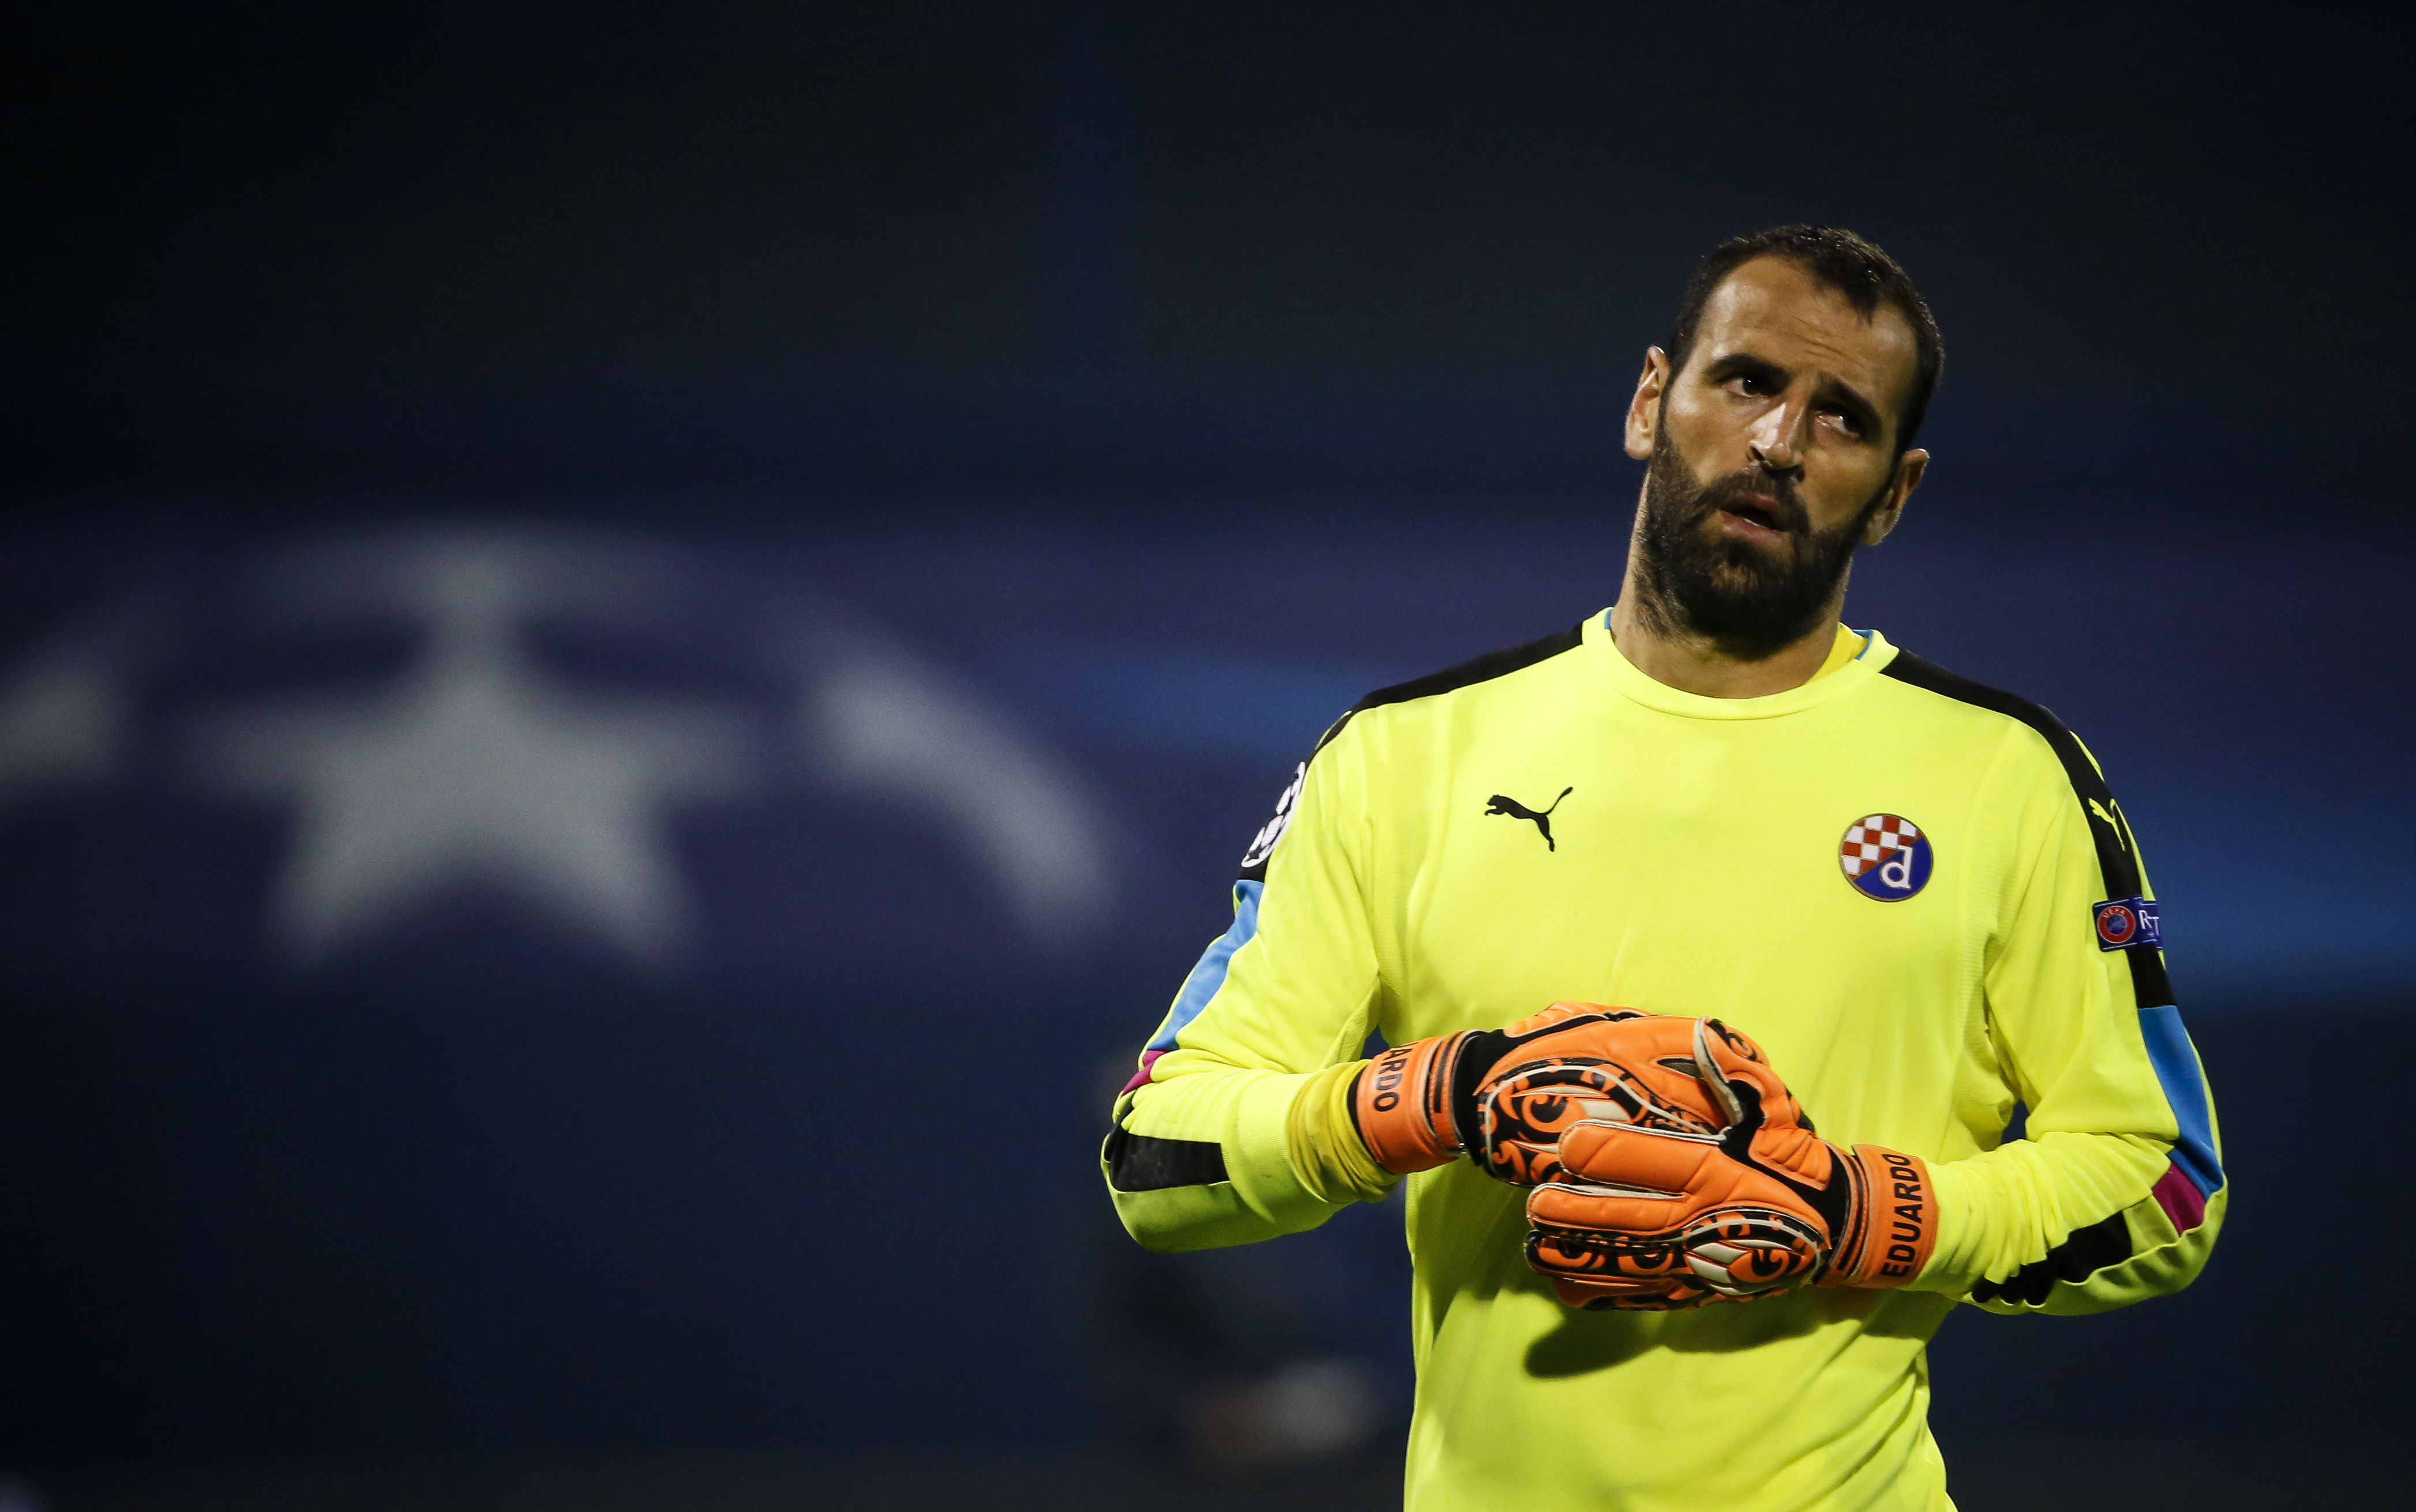 ZAGREB, CROATIA - AUGUST 16: Goalkeeper Eduardo of Dinamo Zagreb looks on during the UEFA Champions League Play-offs First leg match between Dinamo Zagreb and Salzburg at Stadion Maksimir on August 16, 2016 in Zagreb, Croatia. (Photo by Srdjan Stevanovic/Getty Images)